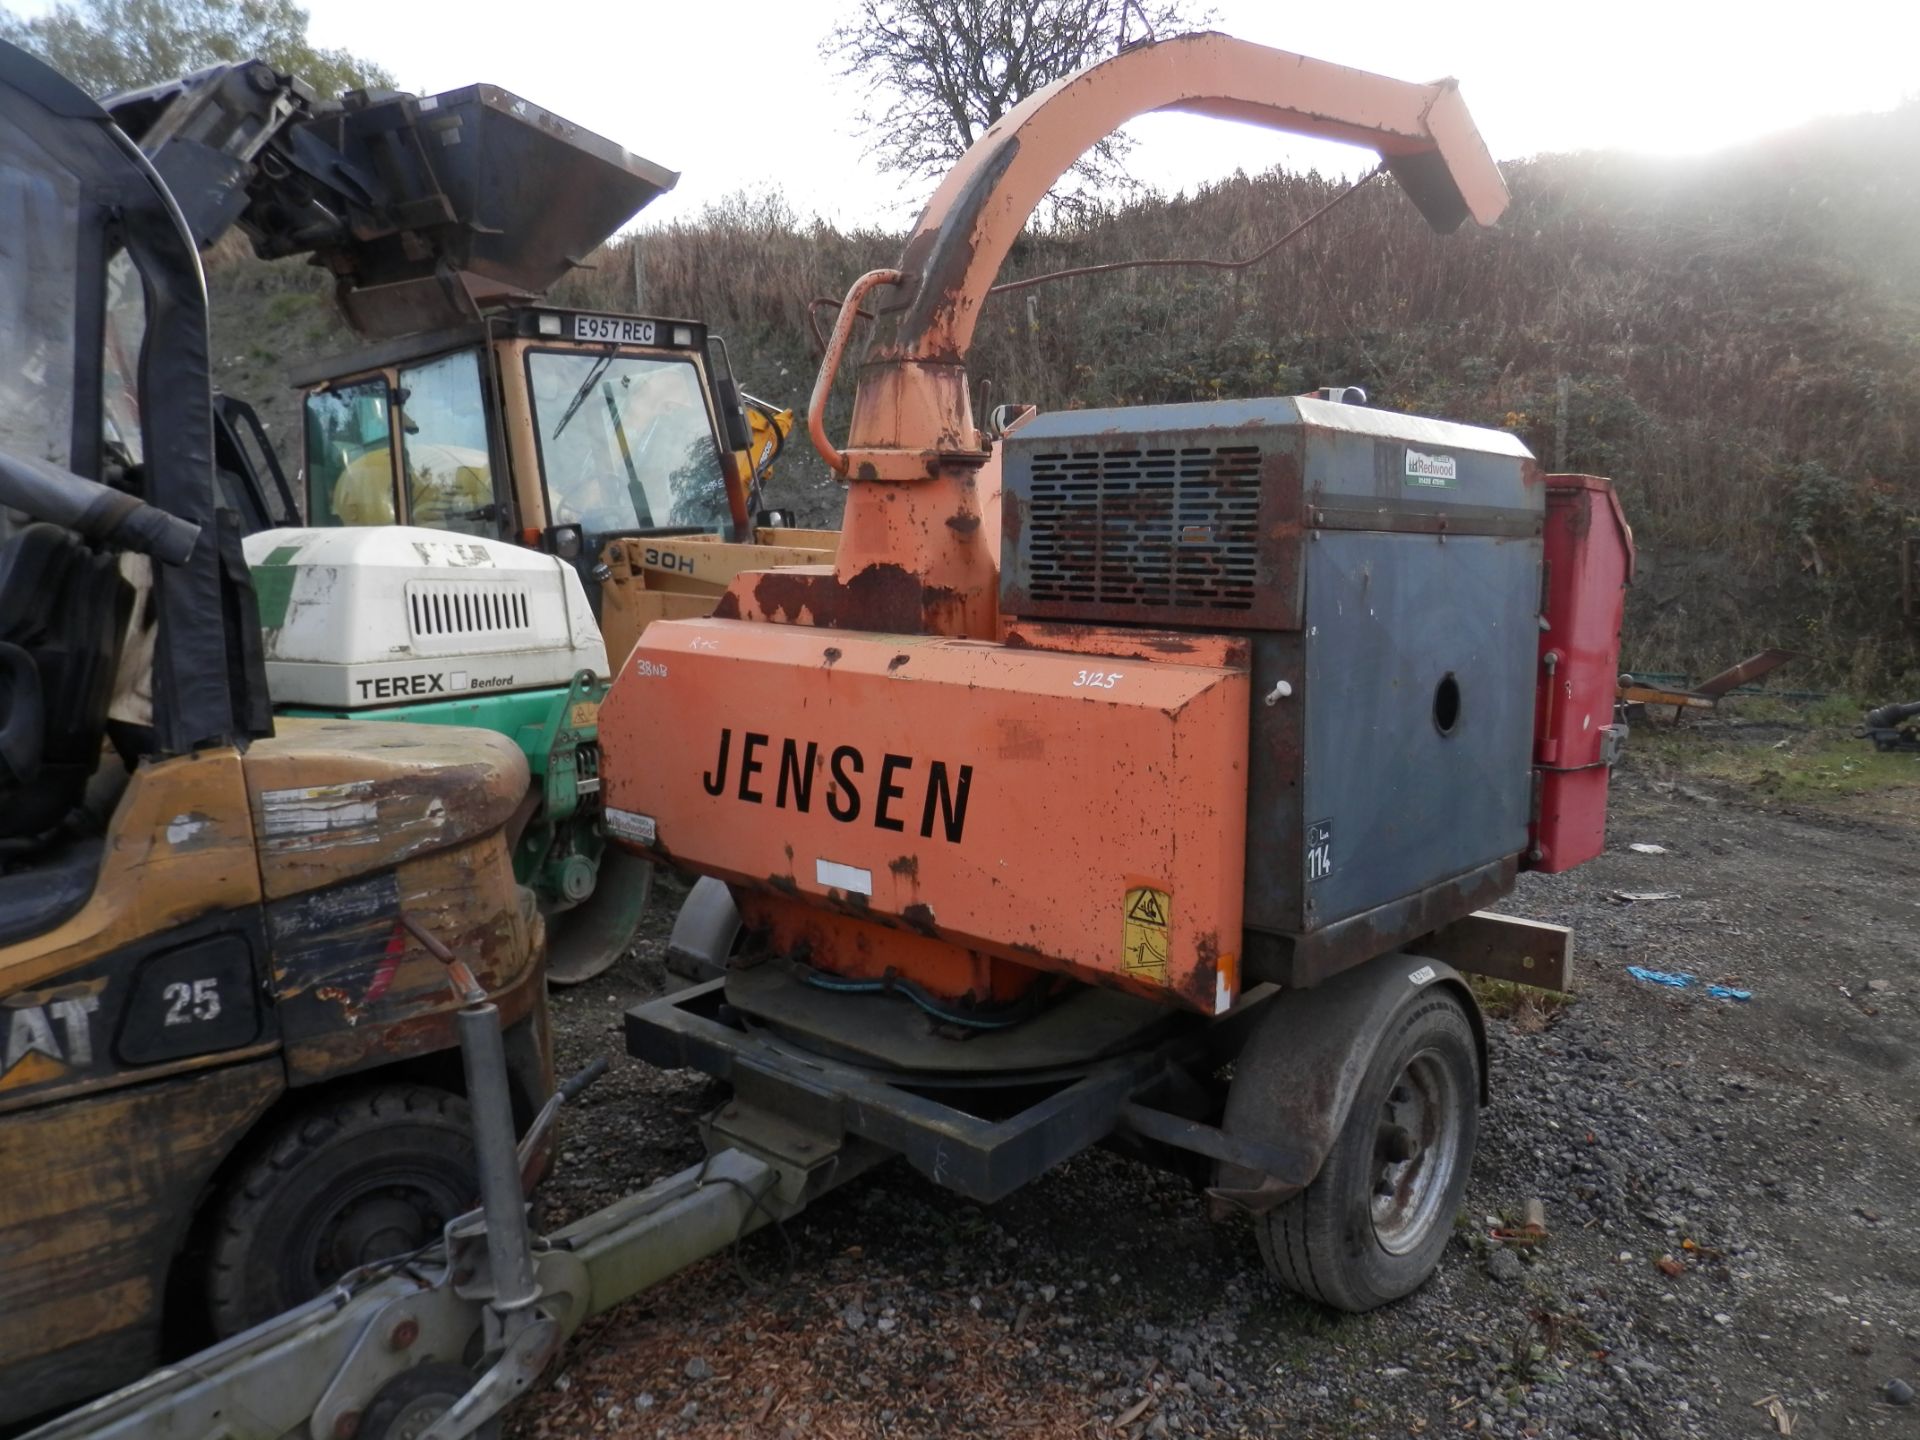 QUALITY 2004 JENSEN DIESEL TURNTABLE CHIPPER, GOOD WORKING ORDER - Image 7 of 9